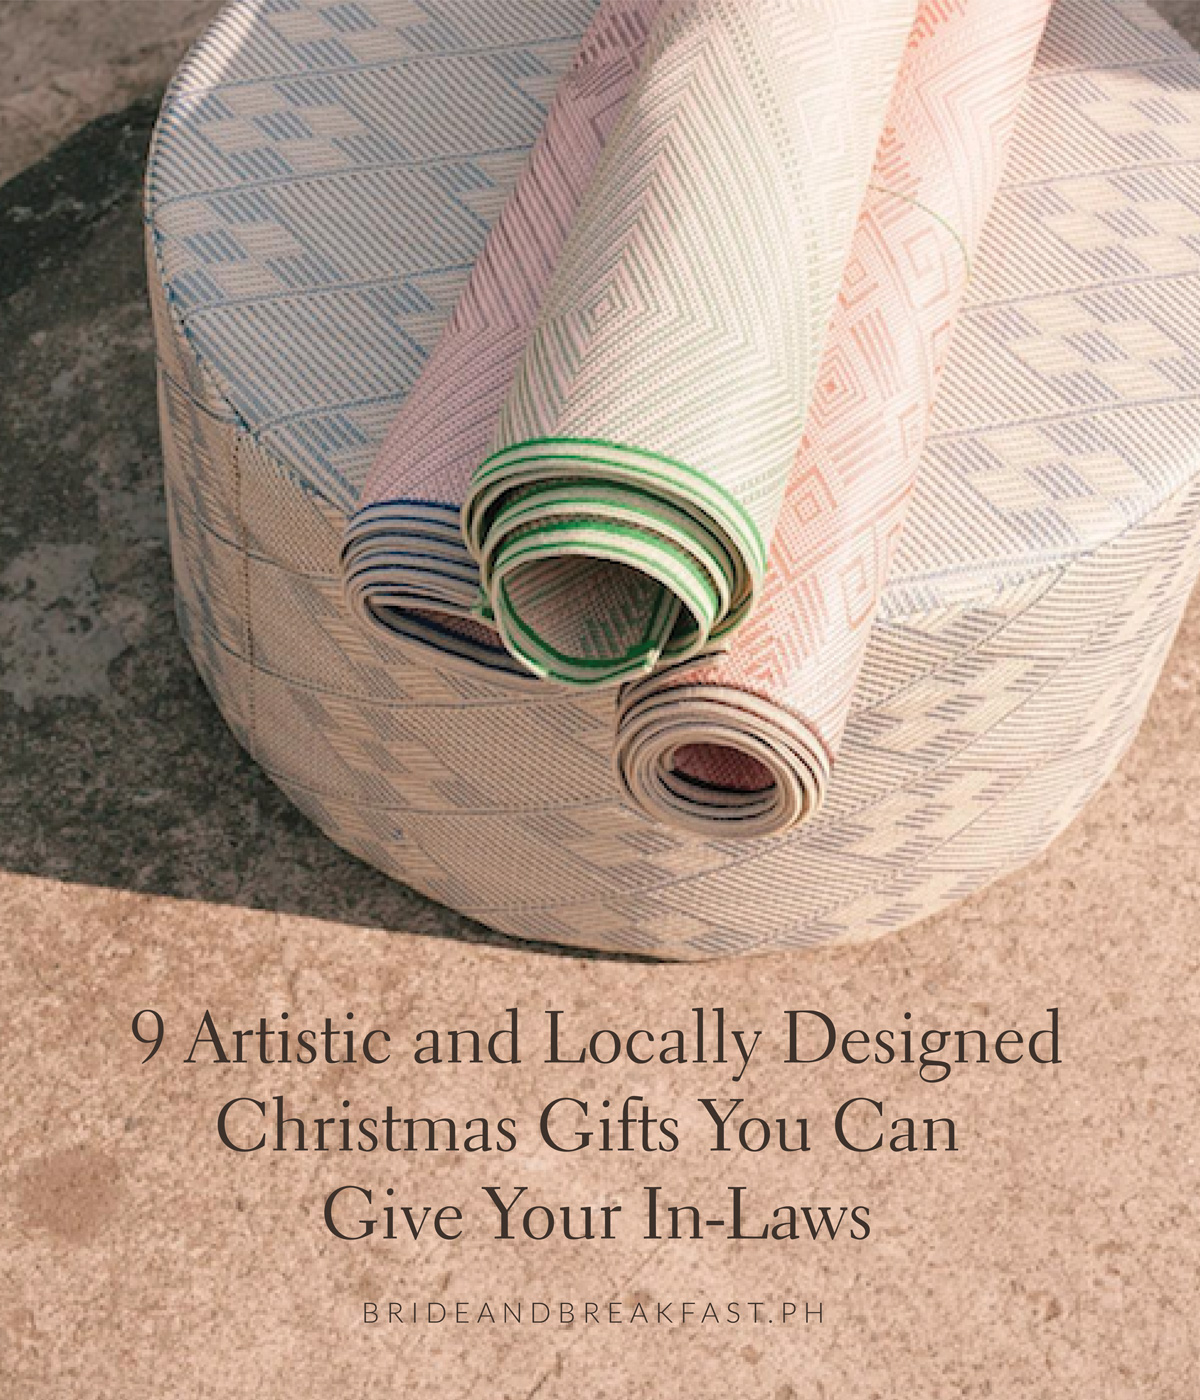 9 Artistic and Locally Designed Christmas Gifts You Can Give Your In-Laws